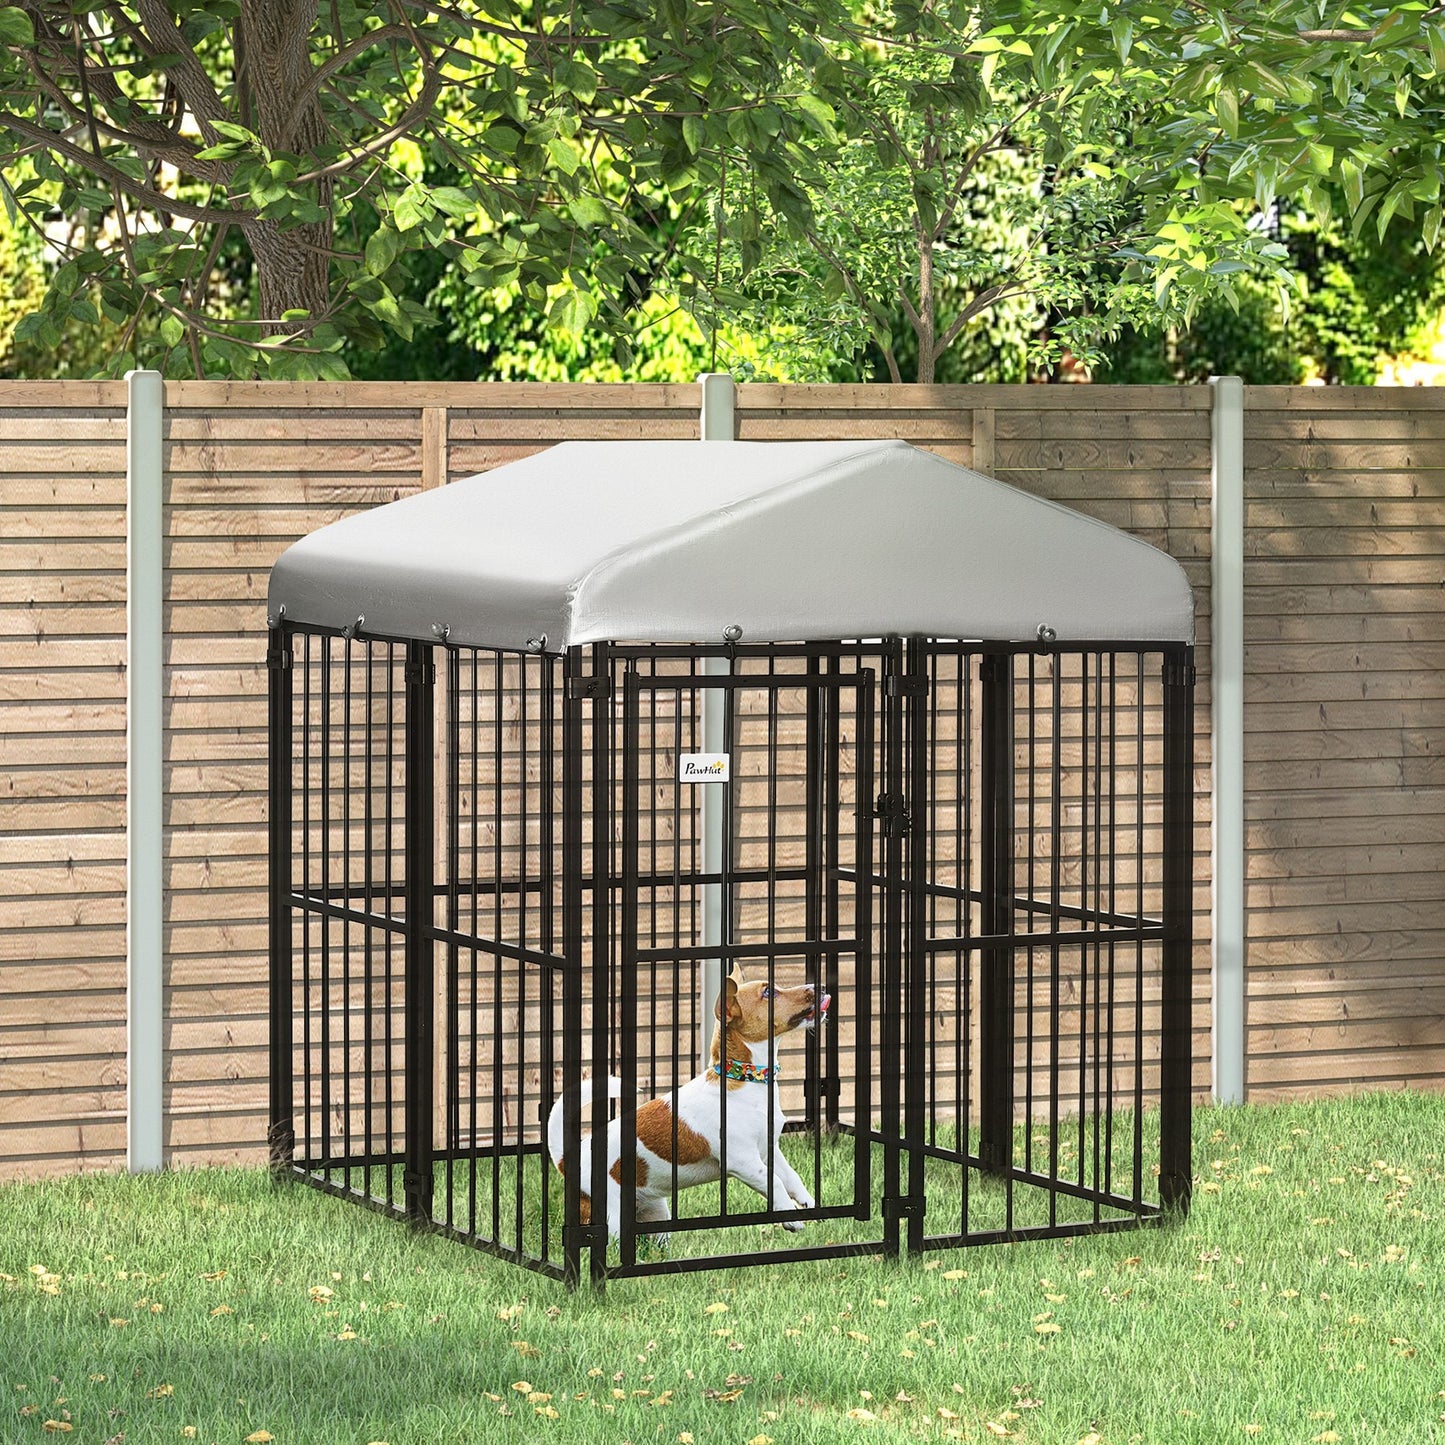 Outdoor and Garden-4' x 4' Dog Playpen, Outdoor Puppy Exercise Pen with Water-resistant UV Protection Canopy, Dog Run Enclosure for Small & Medium Dogs - Outdoor Style Company